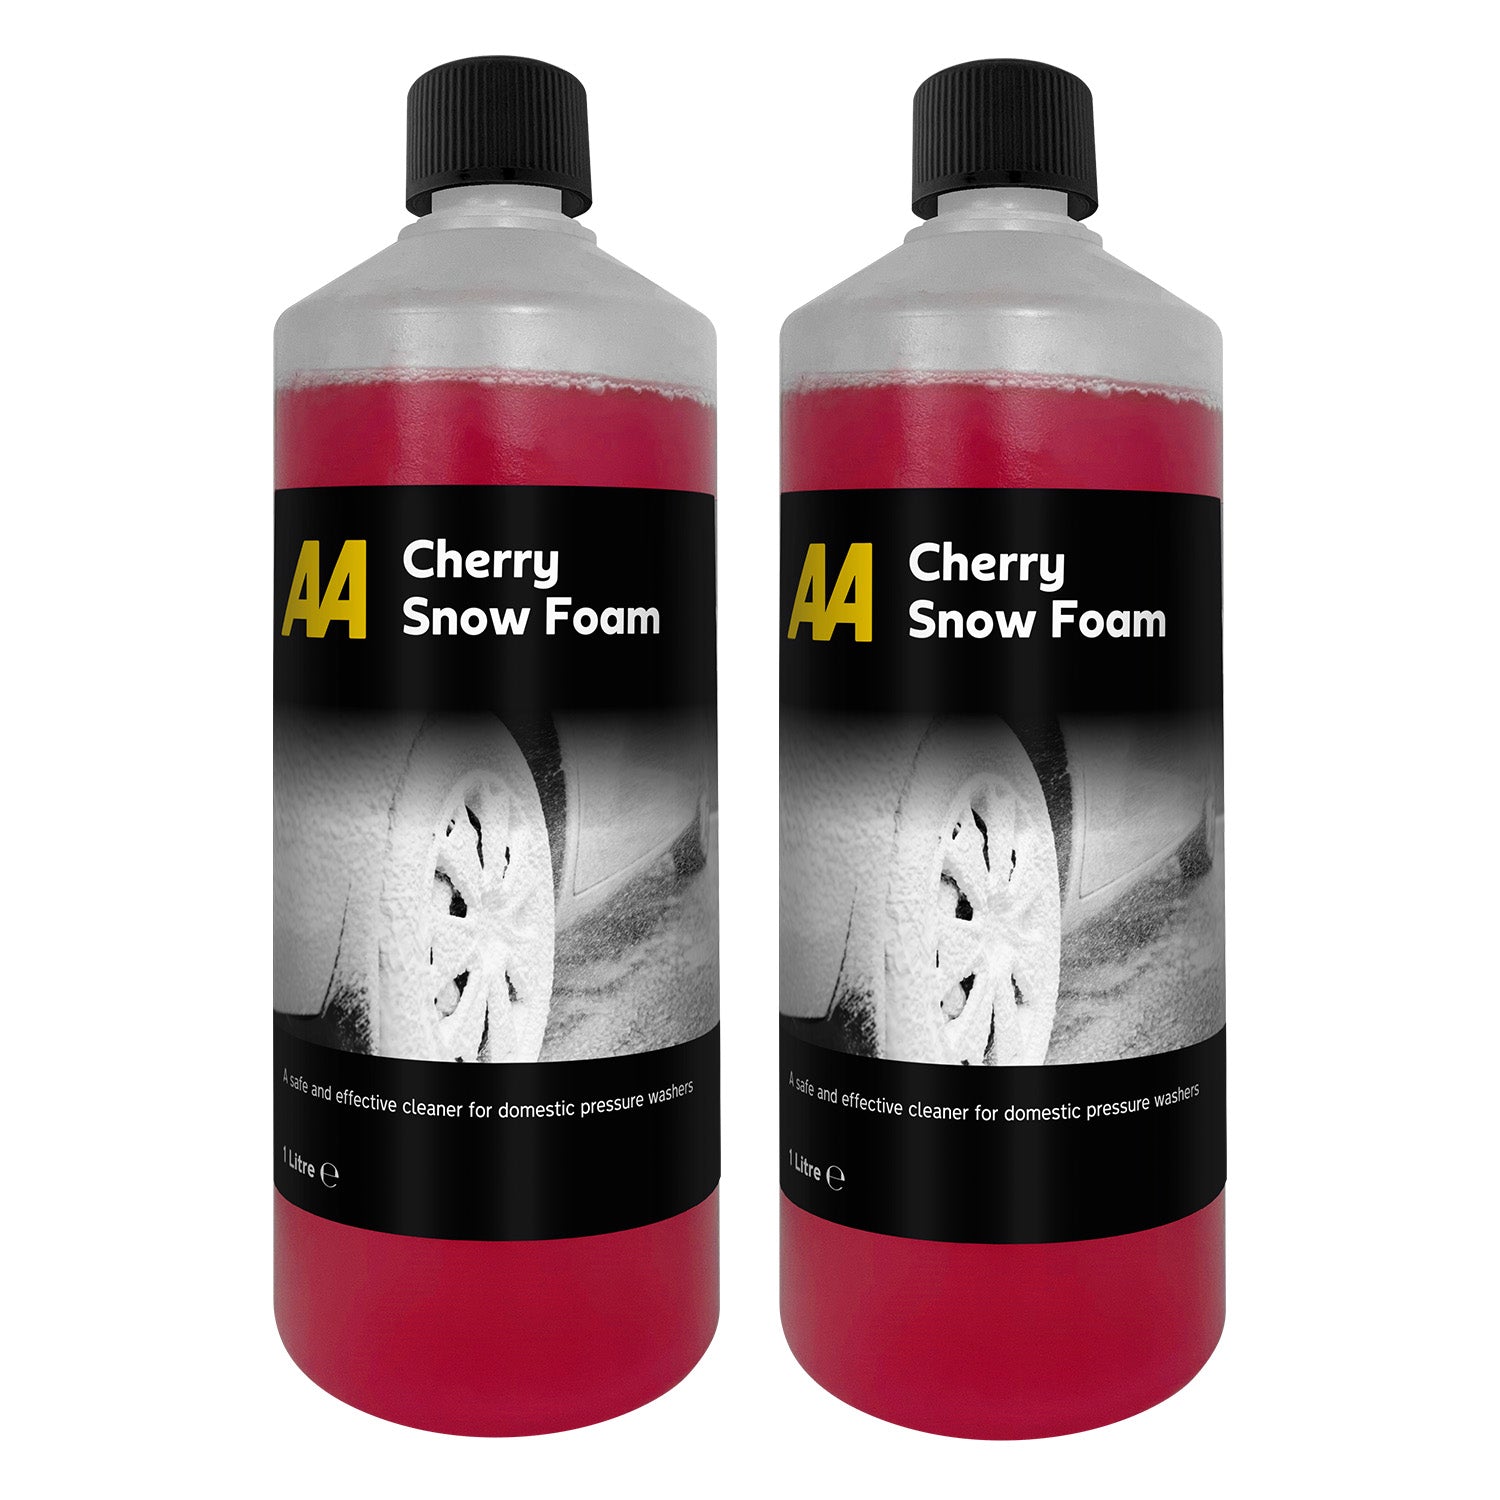 AA Car Essentials Snow Foam 2 x 1 Litre Concentrate, Cherry Fragrance